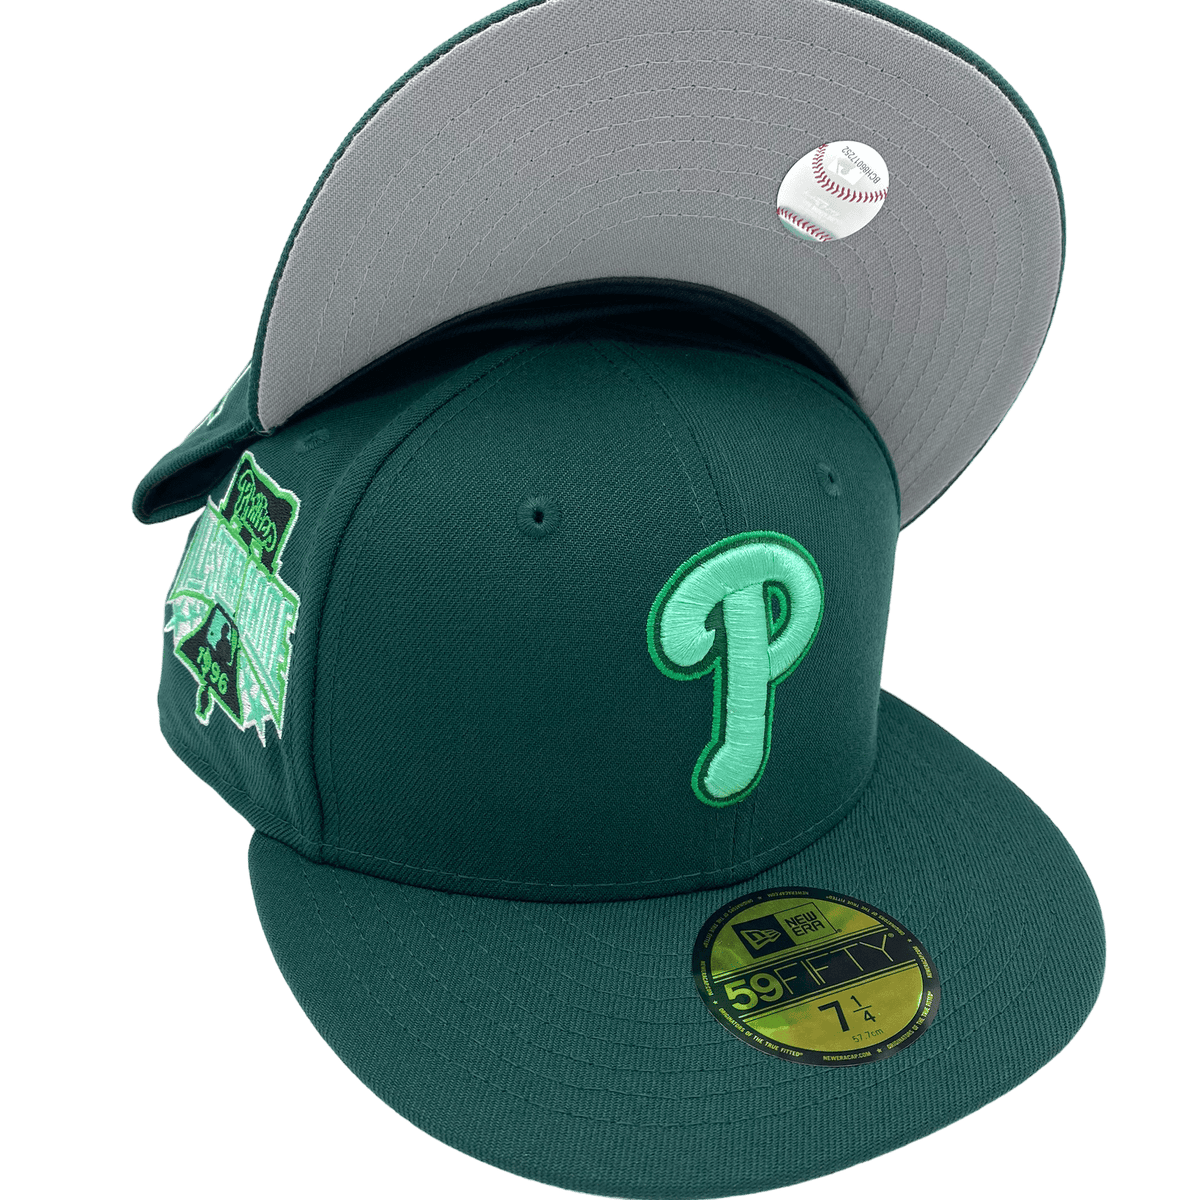 Philadelphia Phillies Mitchell & Ness Cooperstown Collection Pro Crown  Snapback Hat - White